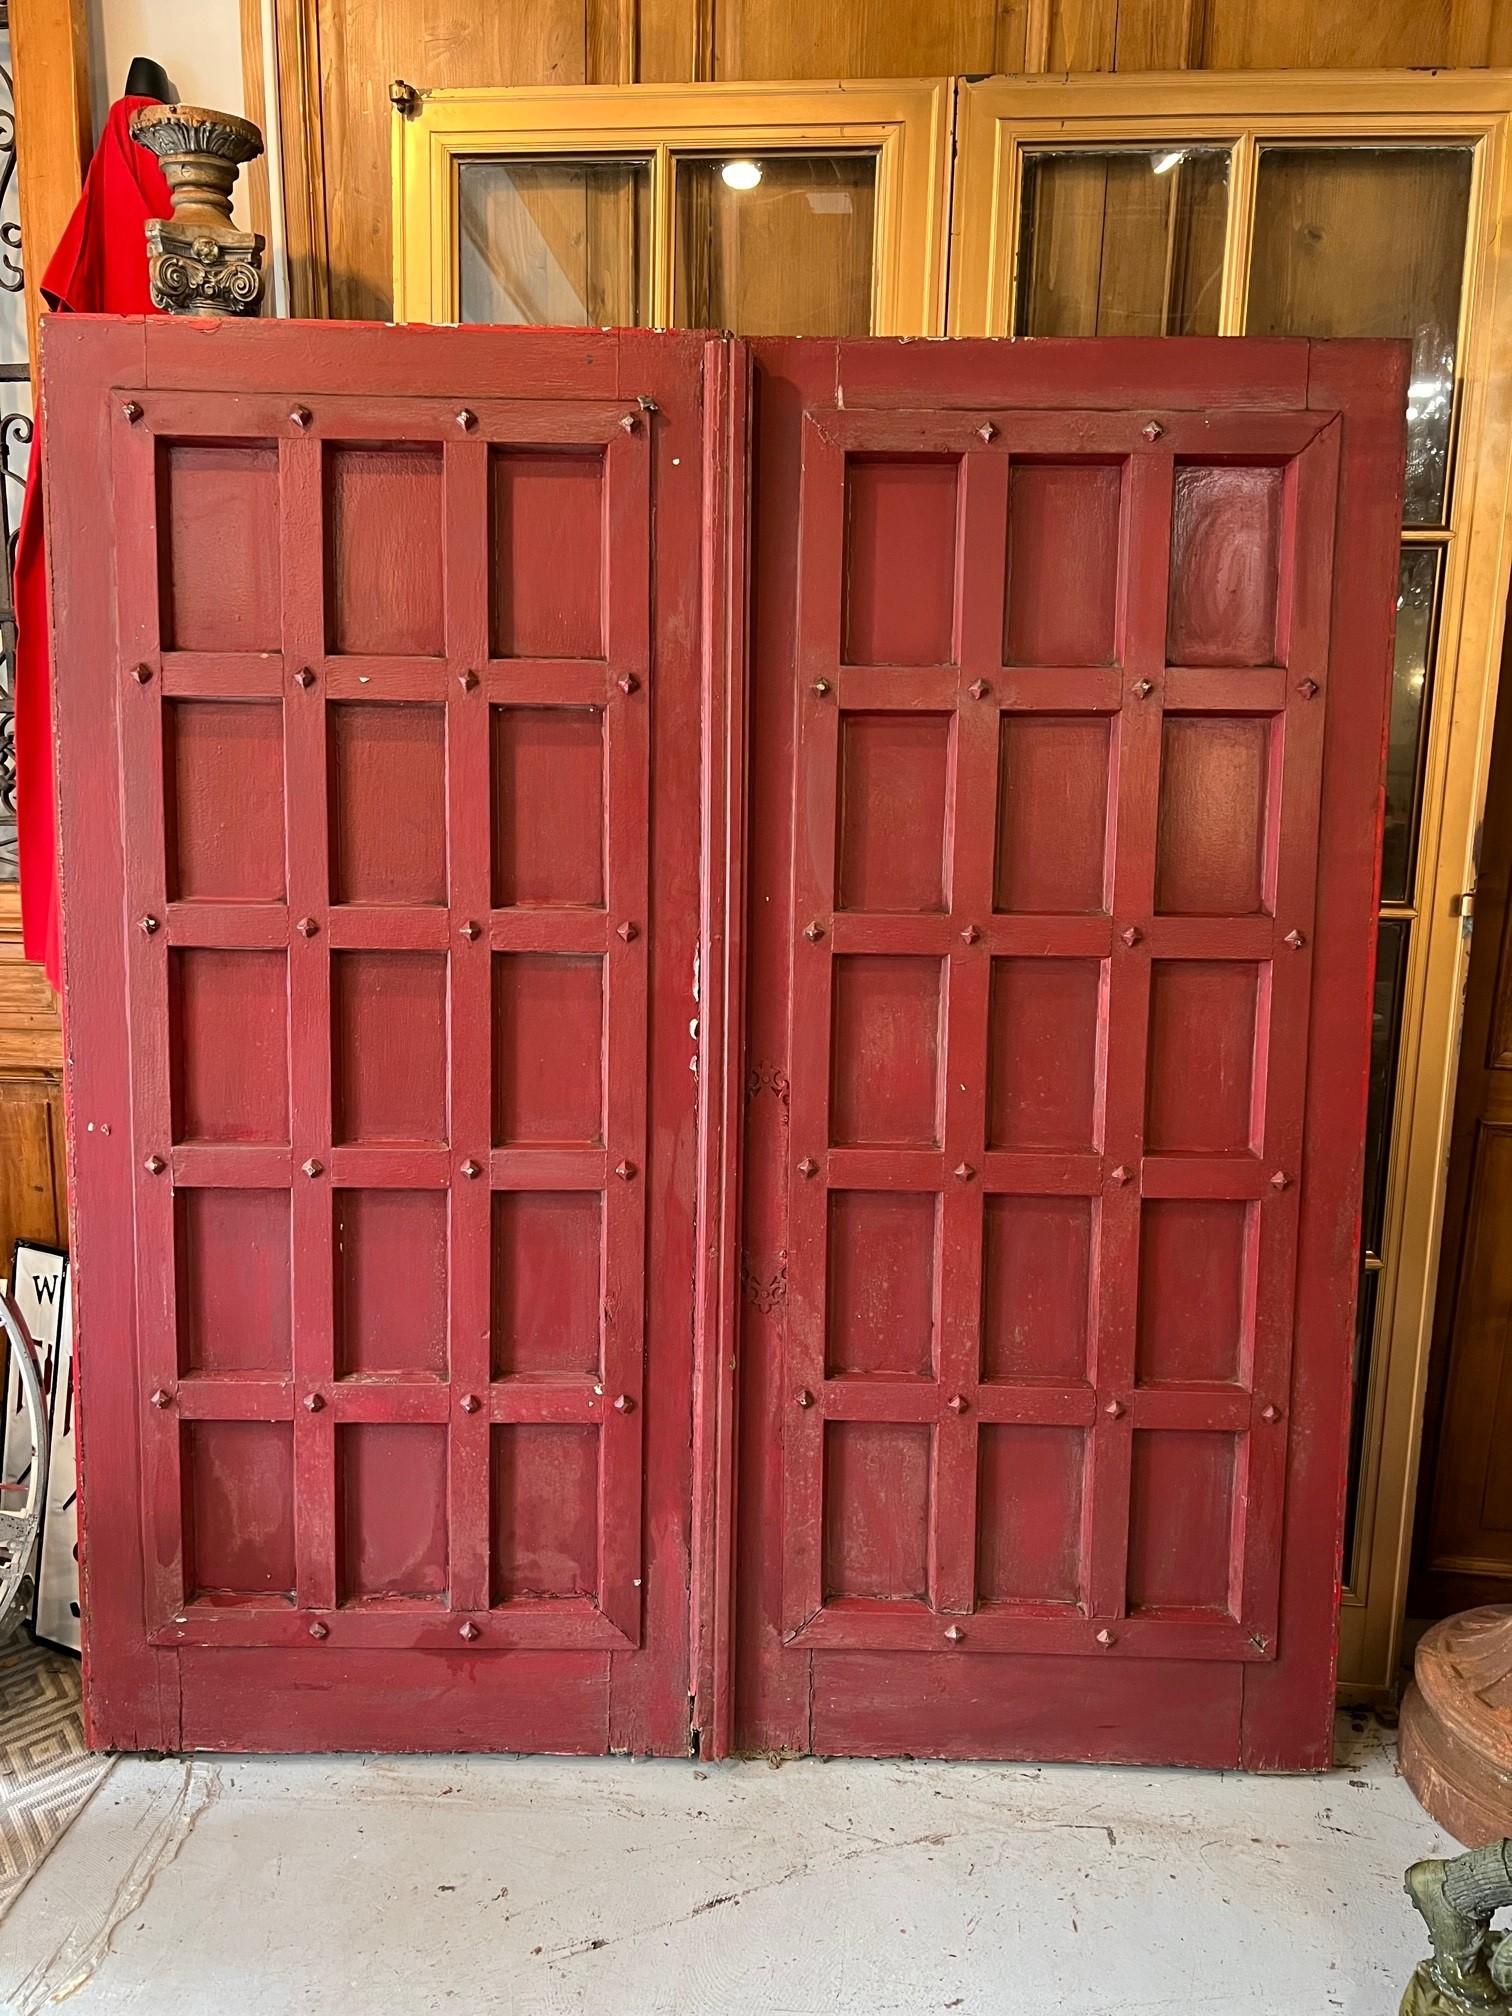 Early 20th century pair of antique doors with deep panels, a great look. This is a nice pair of doors that would look great sliding on a track between two rooms. Salvaged from an English Tudor in western PA. the doors due have some damage shown in